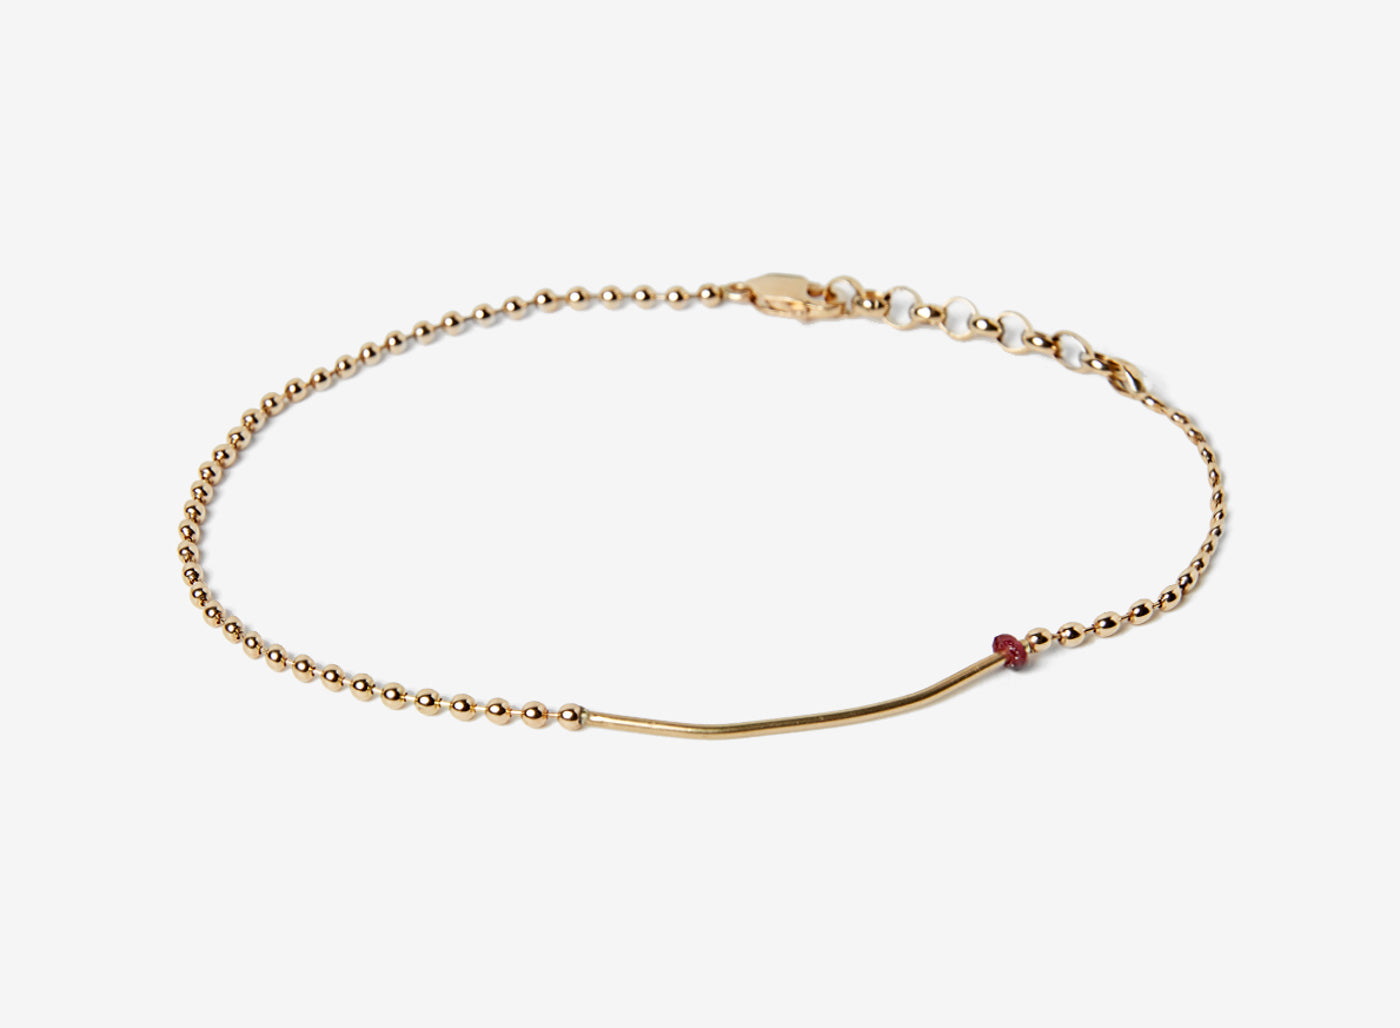 18K SOLID BAR W/ RUBY BRACELET 357: an 18k gold bar connects to a single red ruby and an 18k gold ball chain